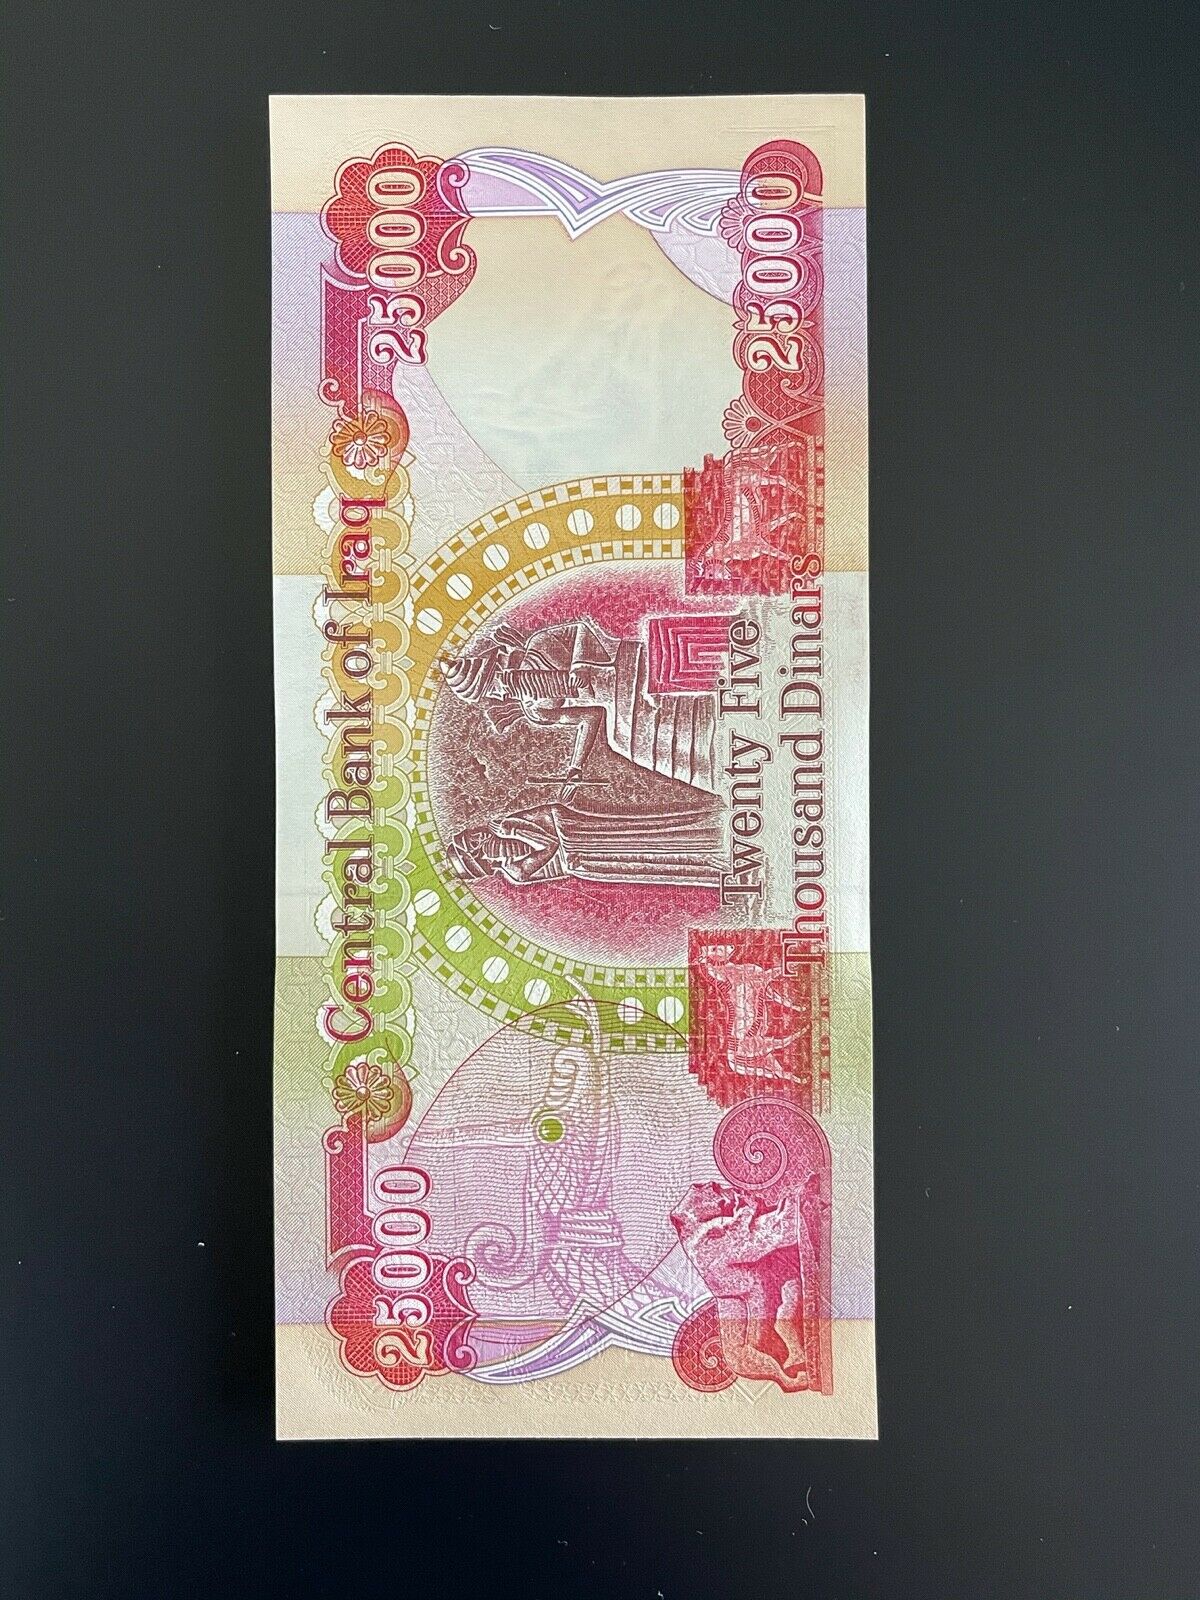 25,000 Iraqi Dinar Currency - Uncirculated Iqd - Authentic New - Free Shipping